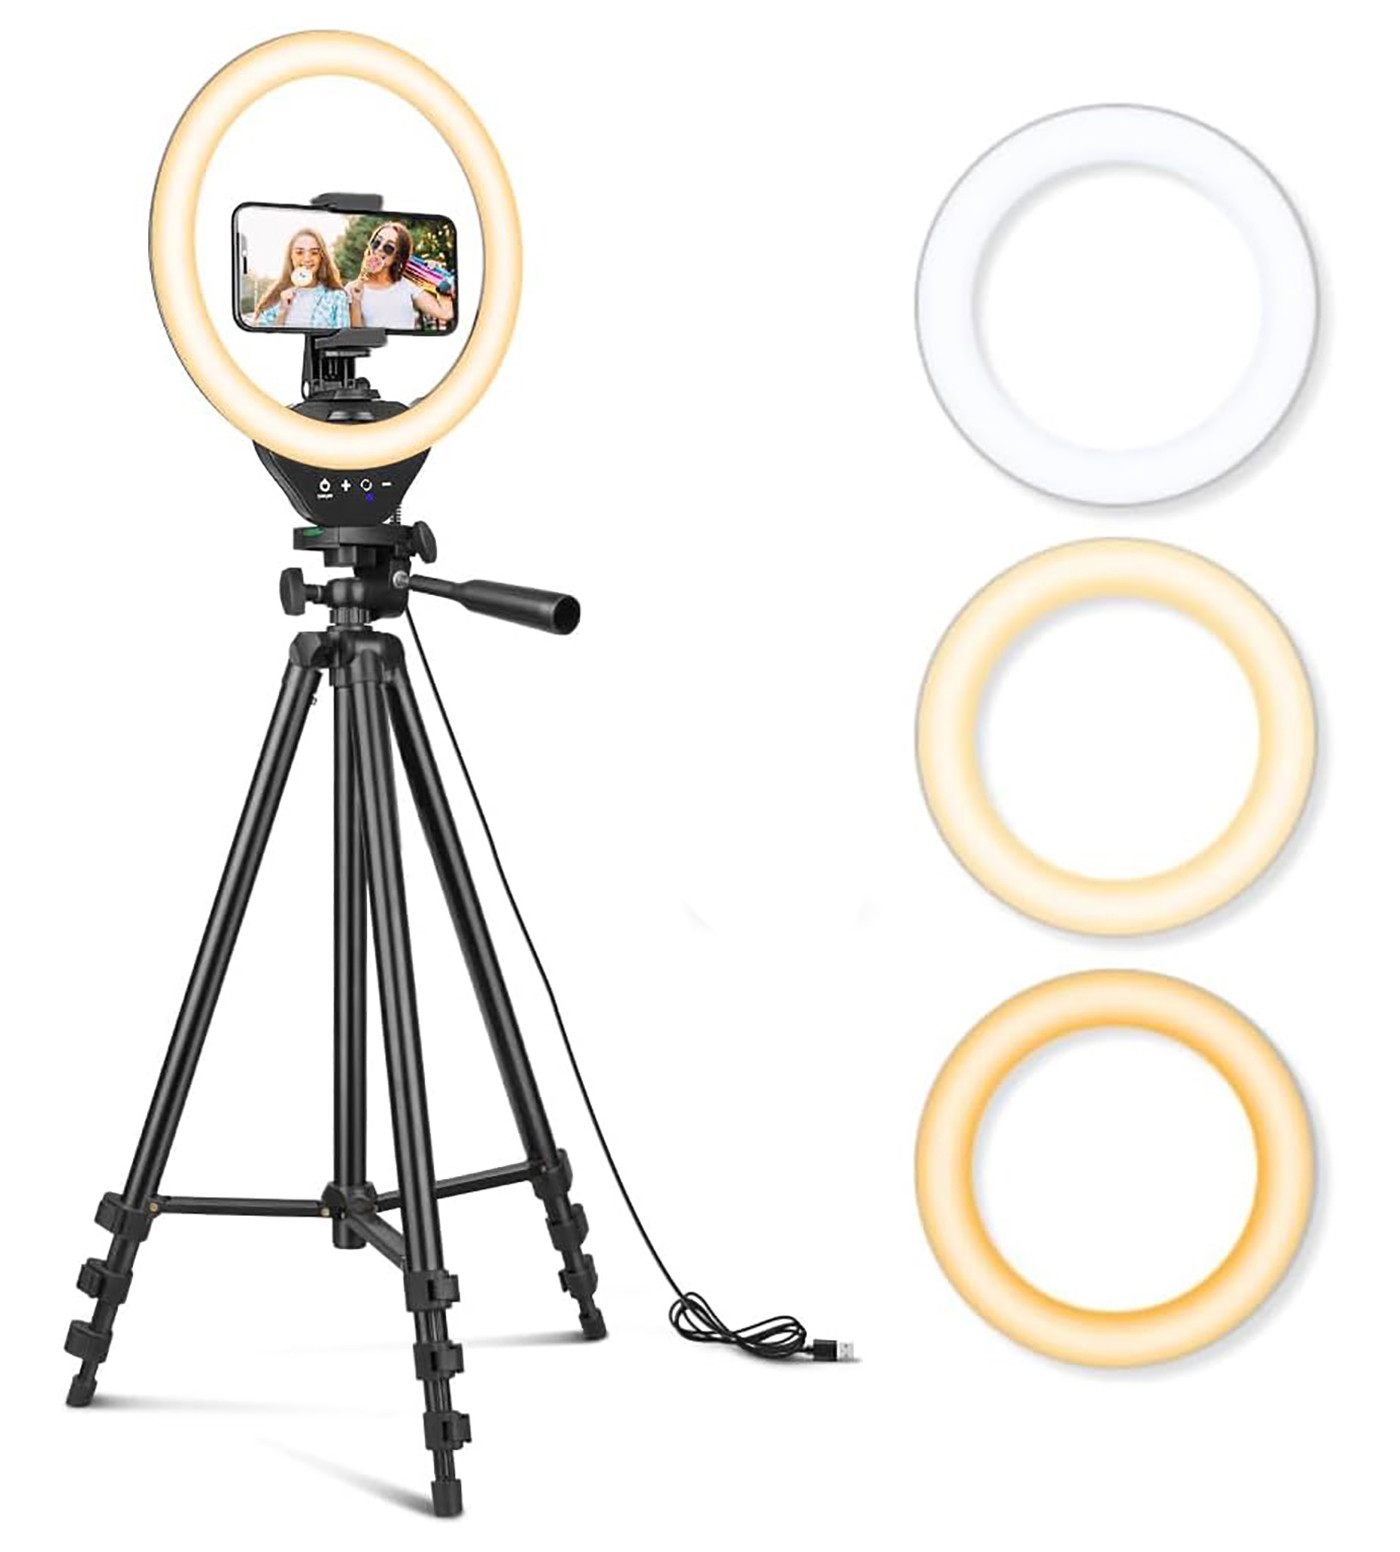 Kuber Industries Selfie Ring Light | Portable Ring Light with 3 Color Modes | Ring Light for YouTube | Video Shoot | Photoshoot | Live Streaming | 10